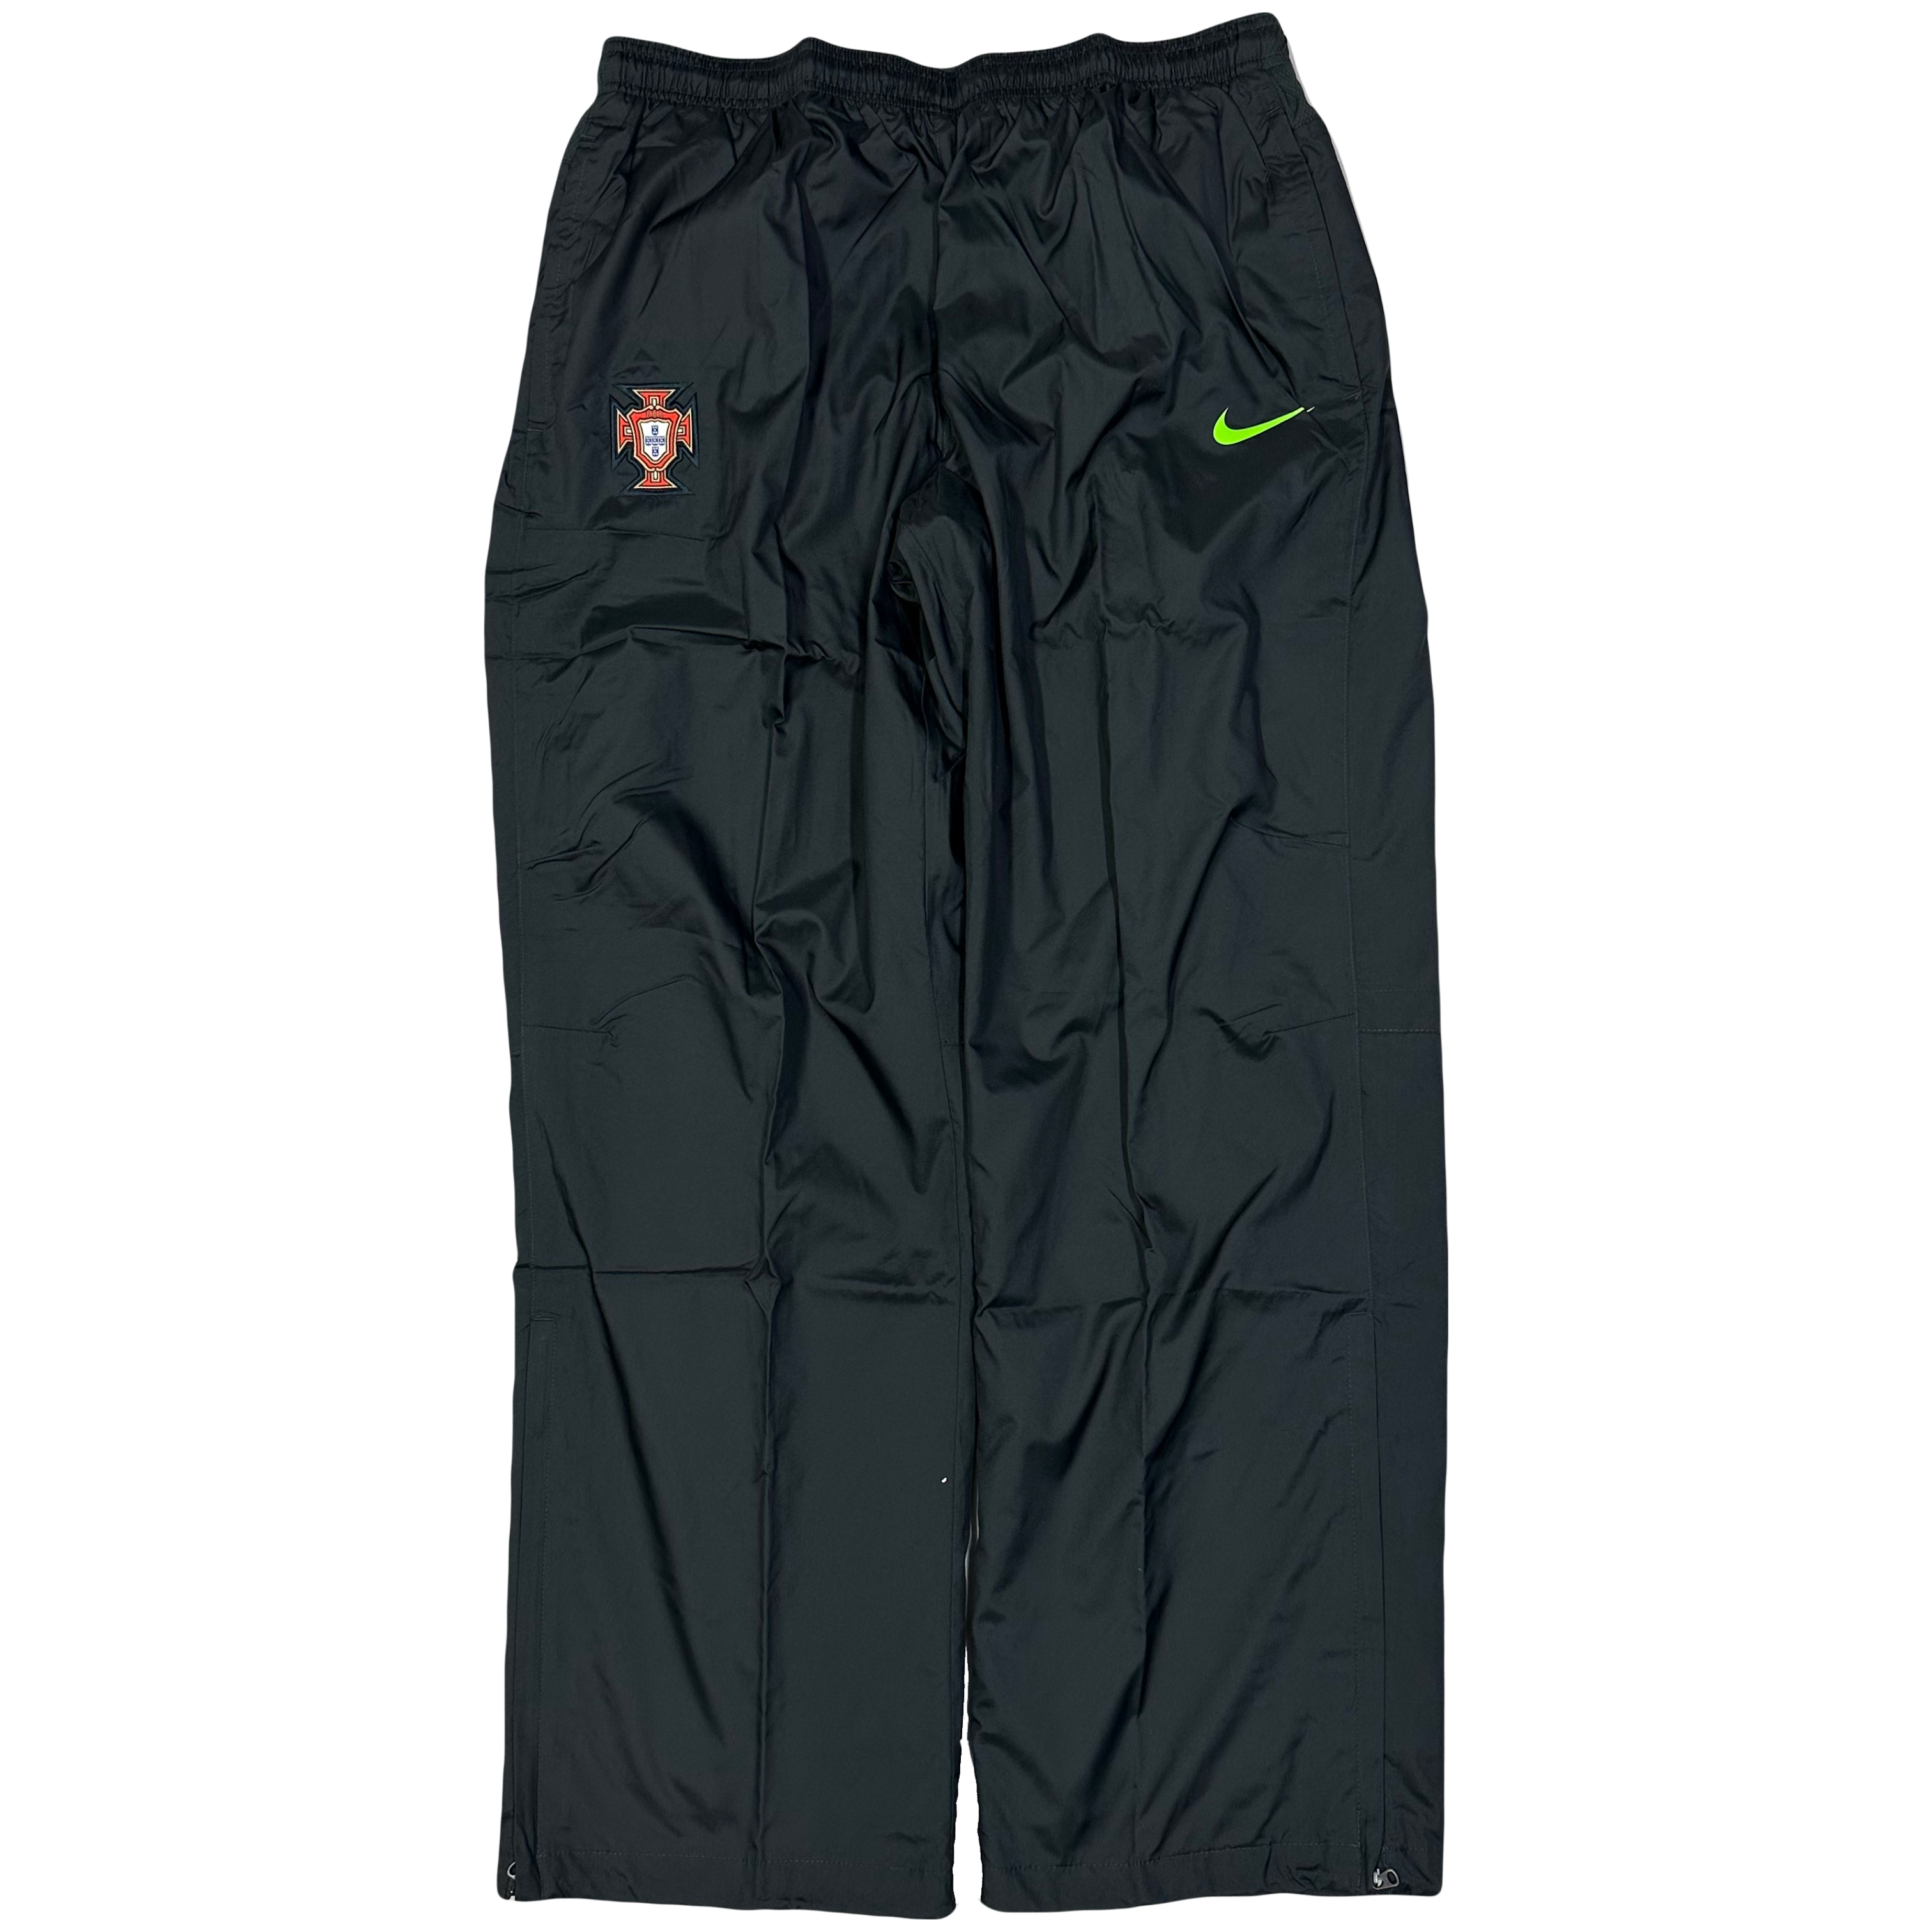 Nike Portugal 2011/12 Tracksuit In Black & Green ( XL )